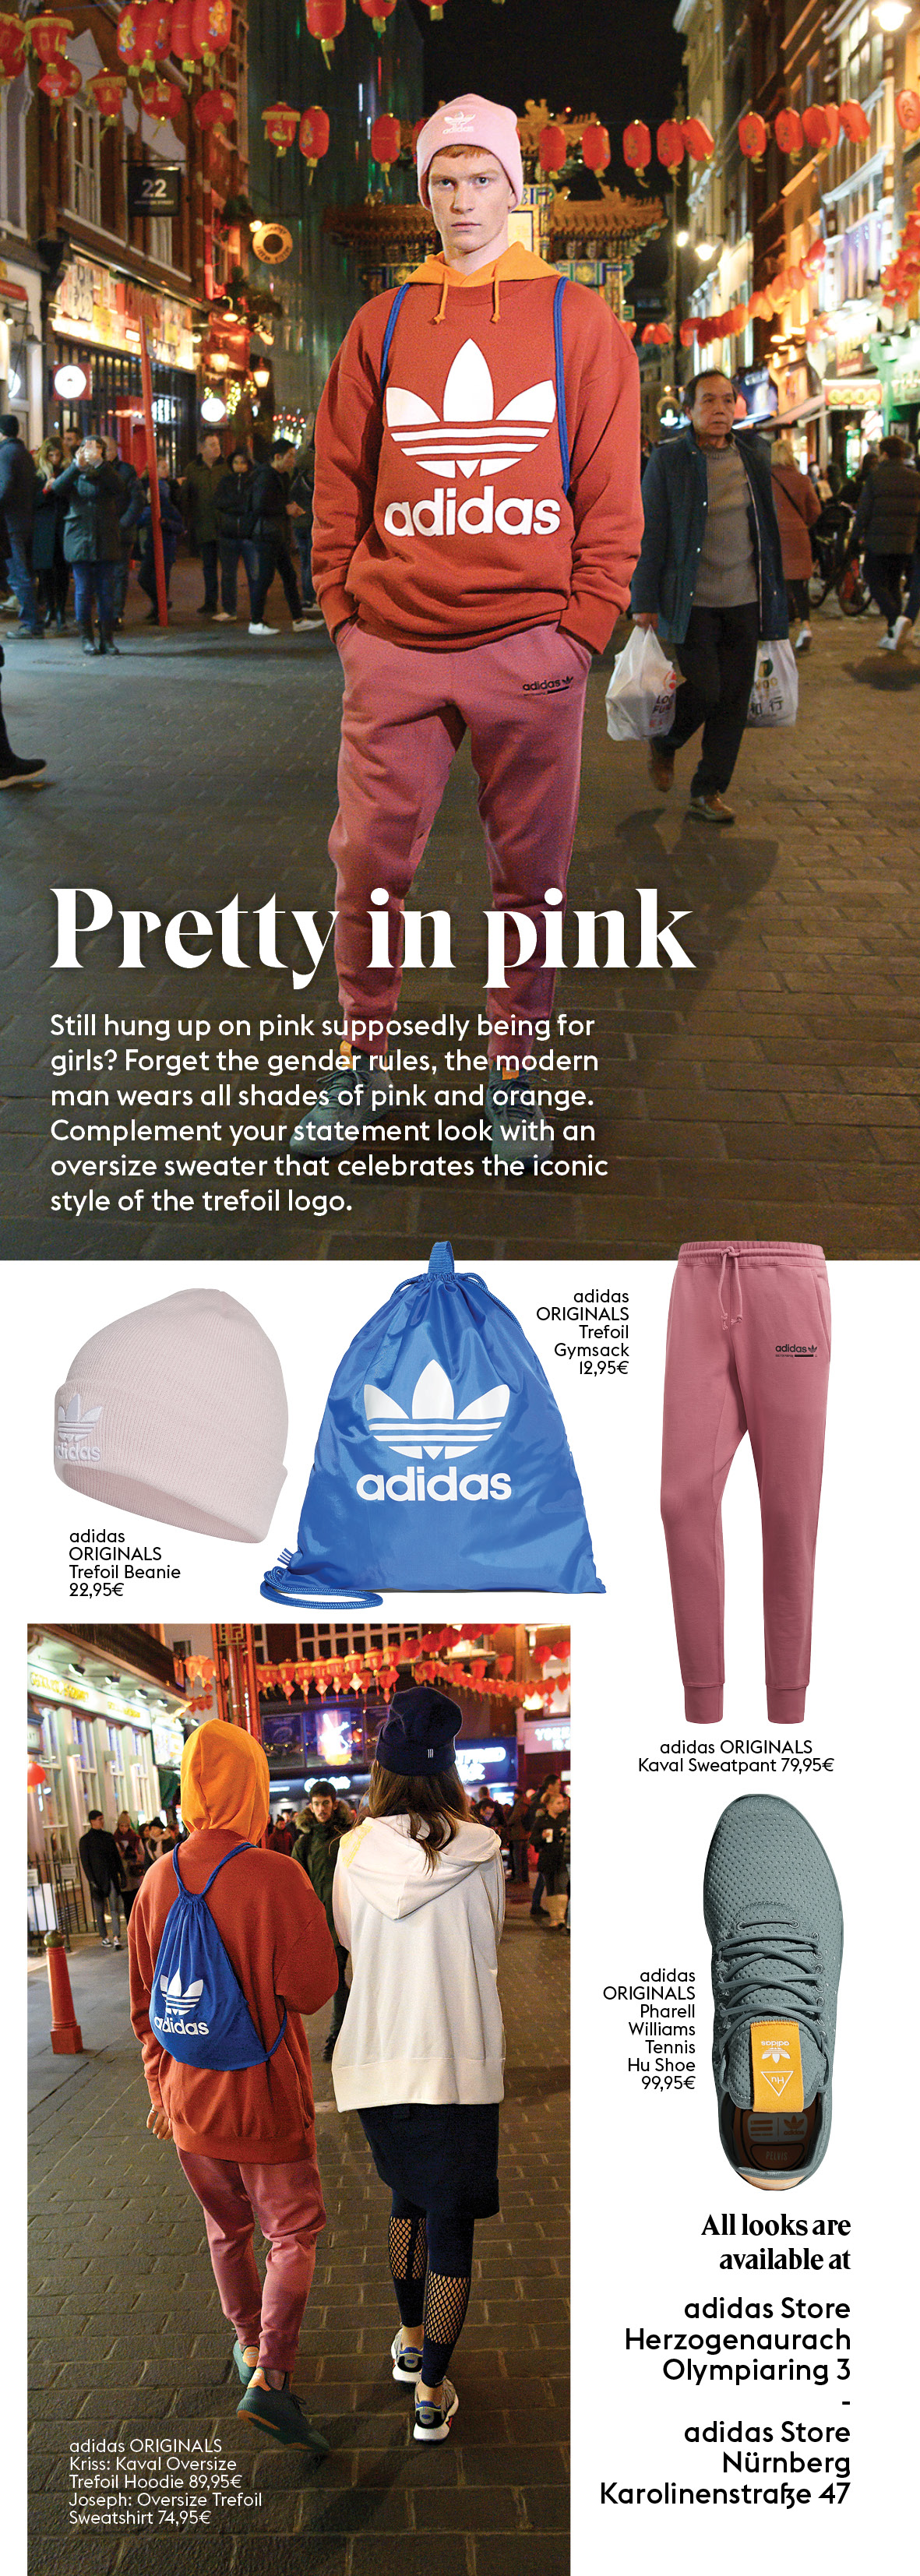 adidas cross over trends by N Style Guide